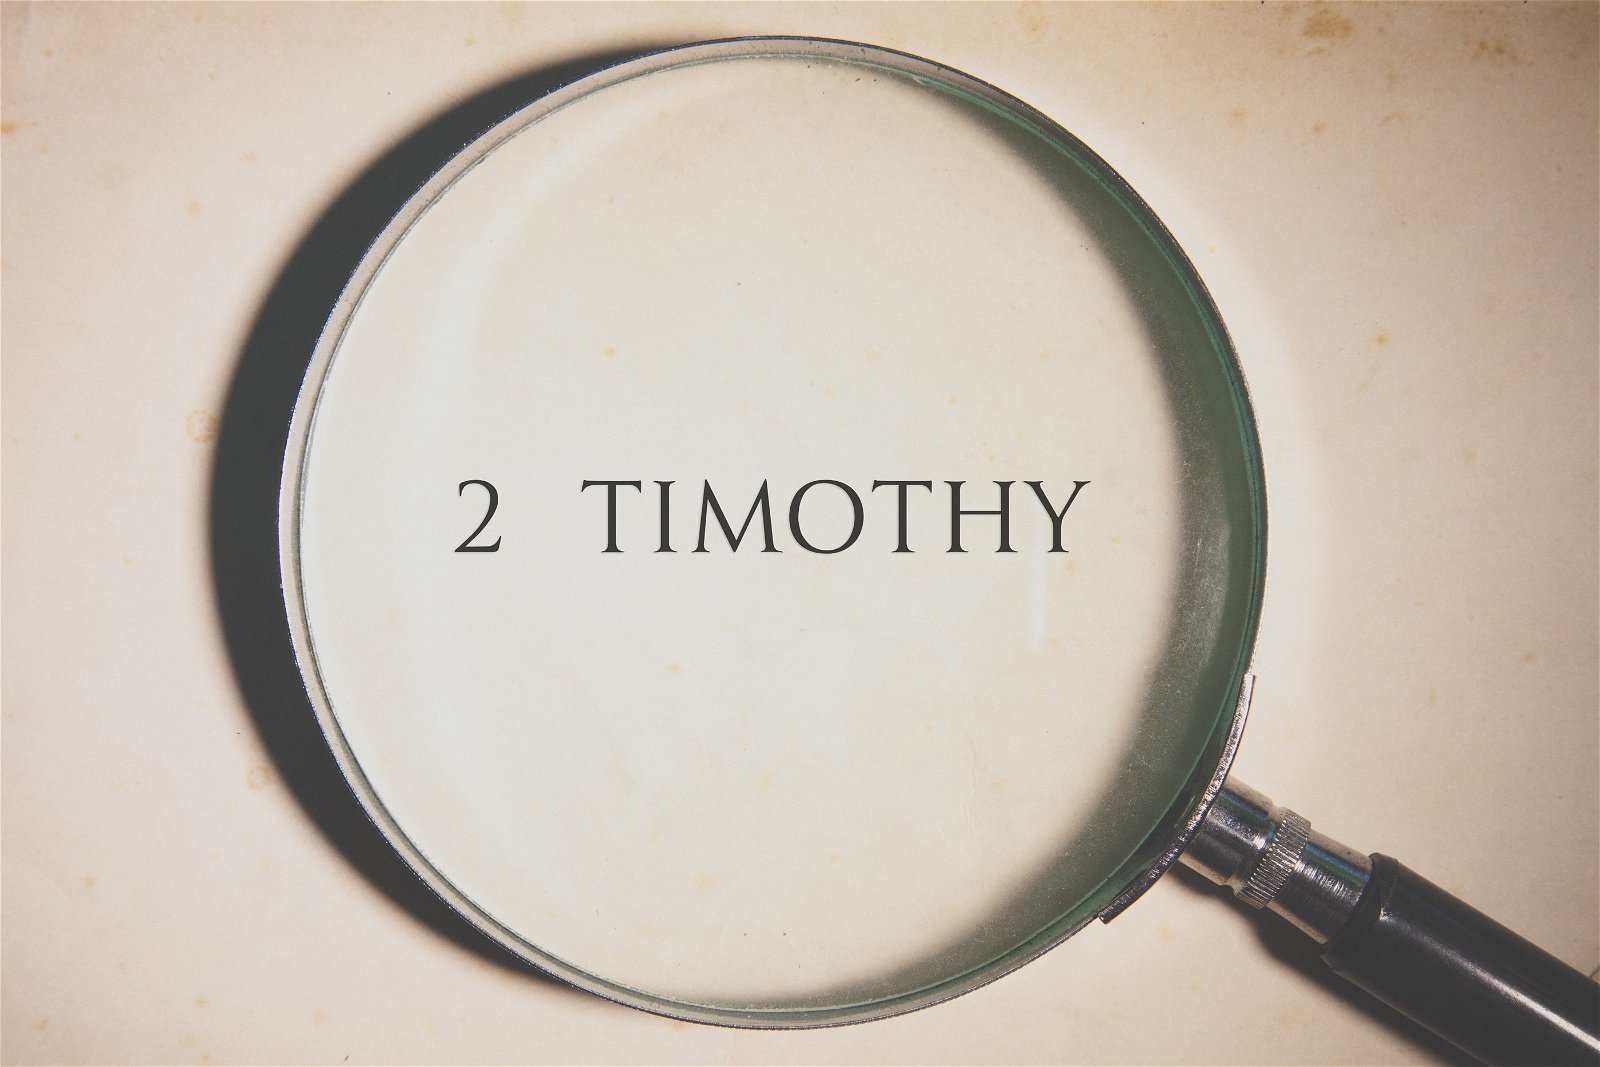 Paul's Farewell Message to Timothy (2 Timothy 3:1-5)